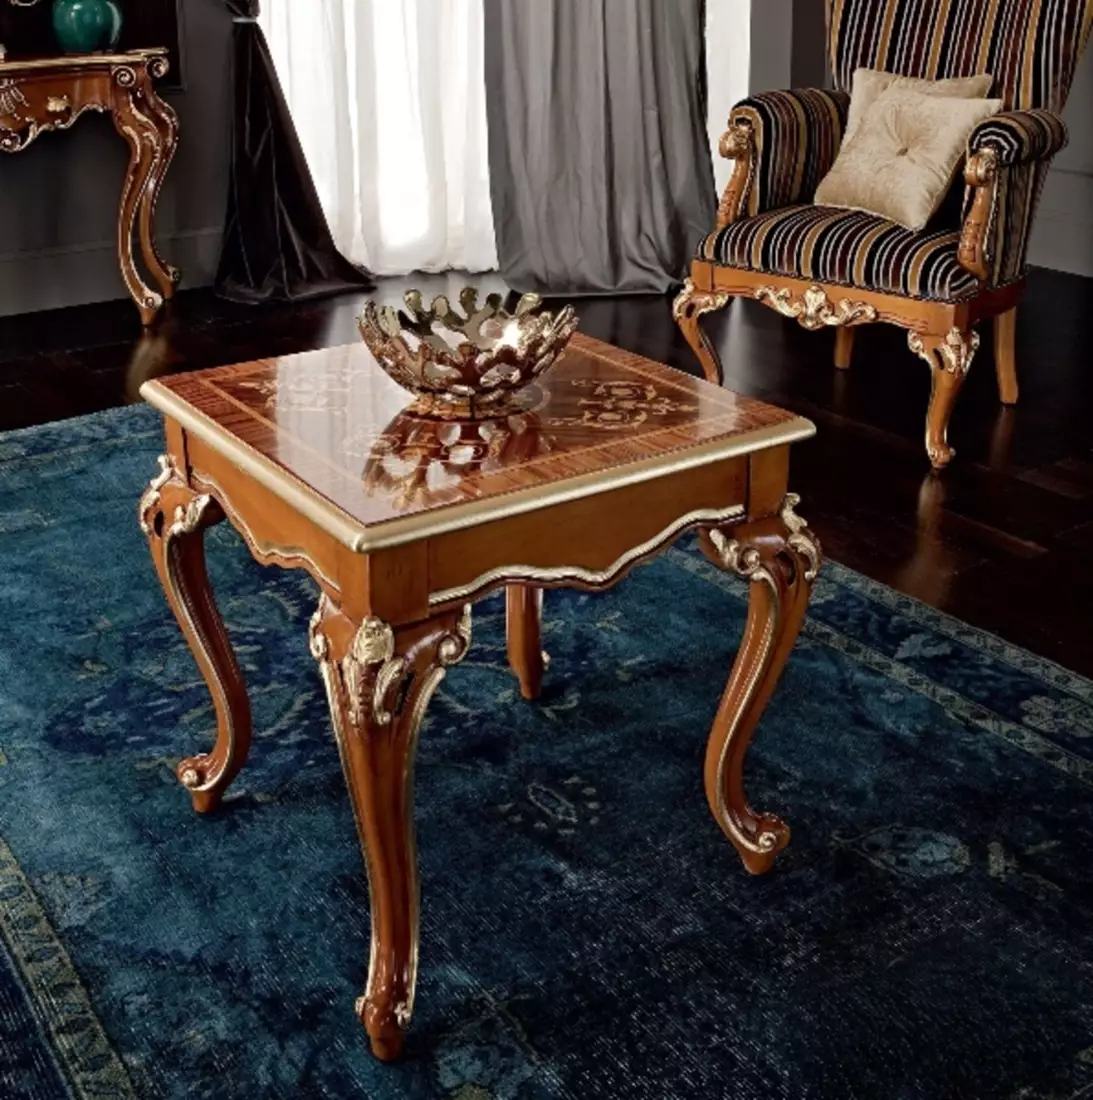 Coffee-table-with-inlays-carves-handmade-with-walnut-Casanova-collection-Modenese-Gastone (1)